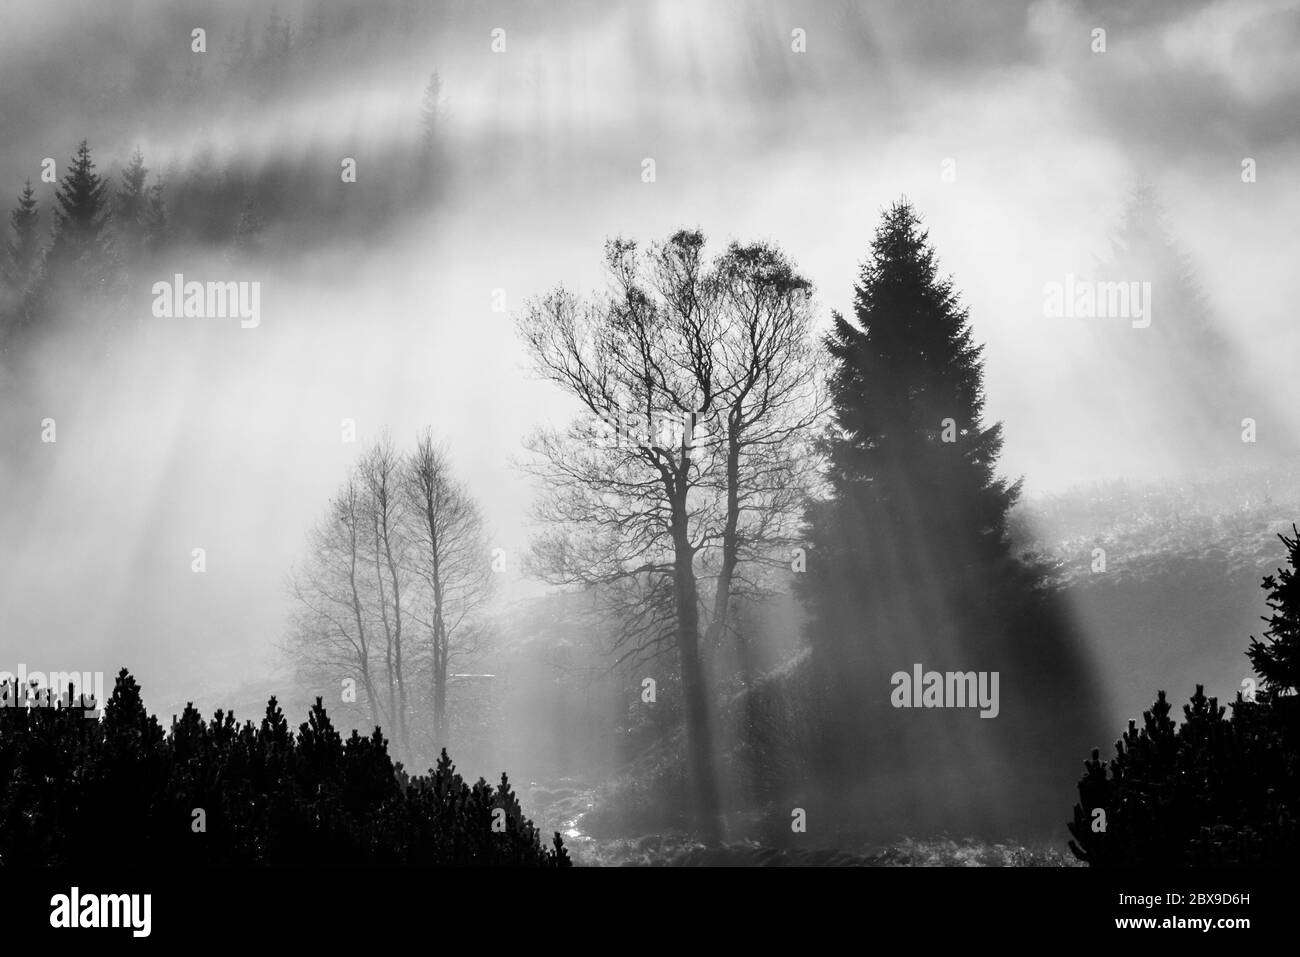 Foggy morning in the nature. Sun beams light through mist with tree silhouettes. Black and white image. Stock Photo